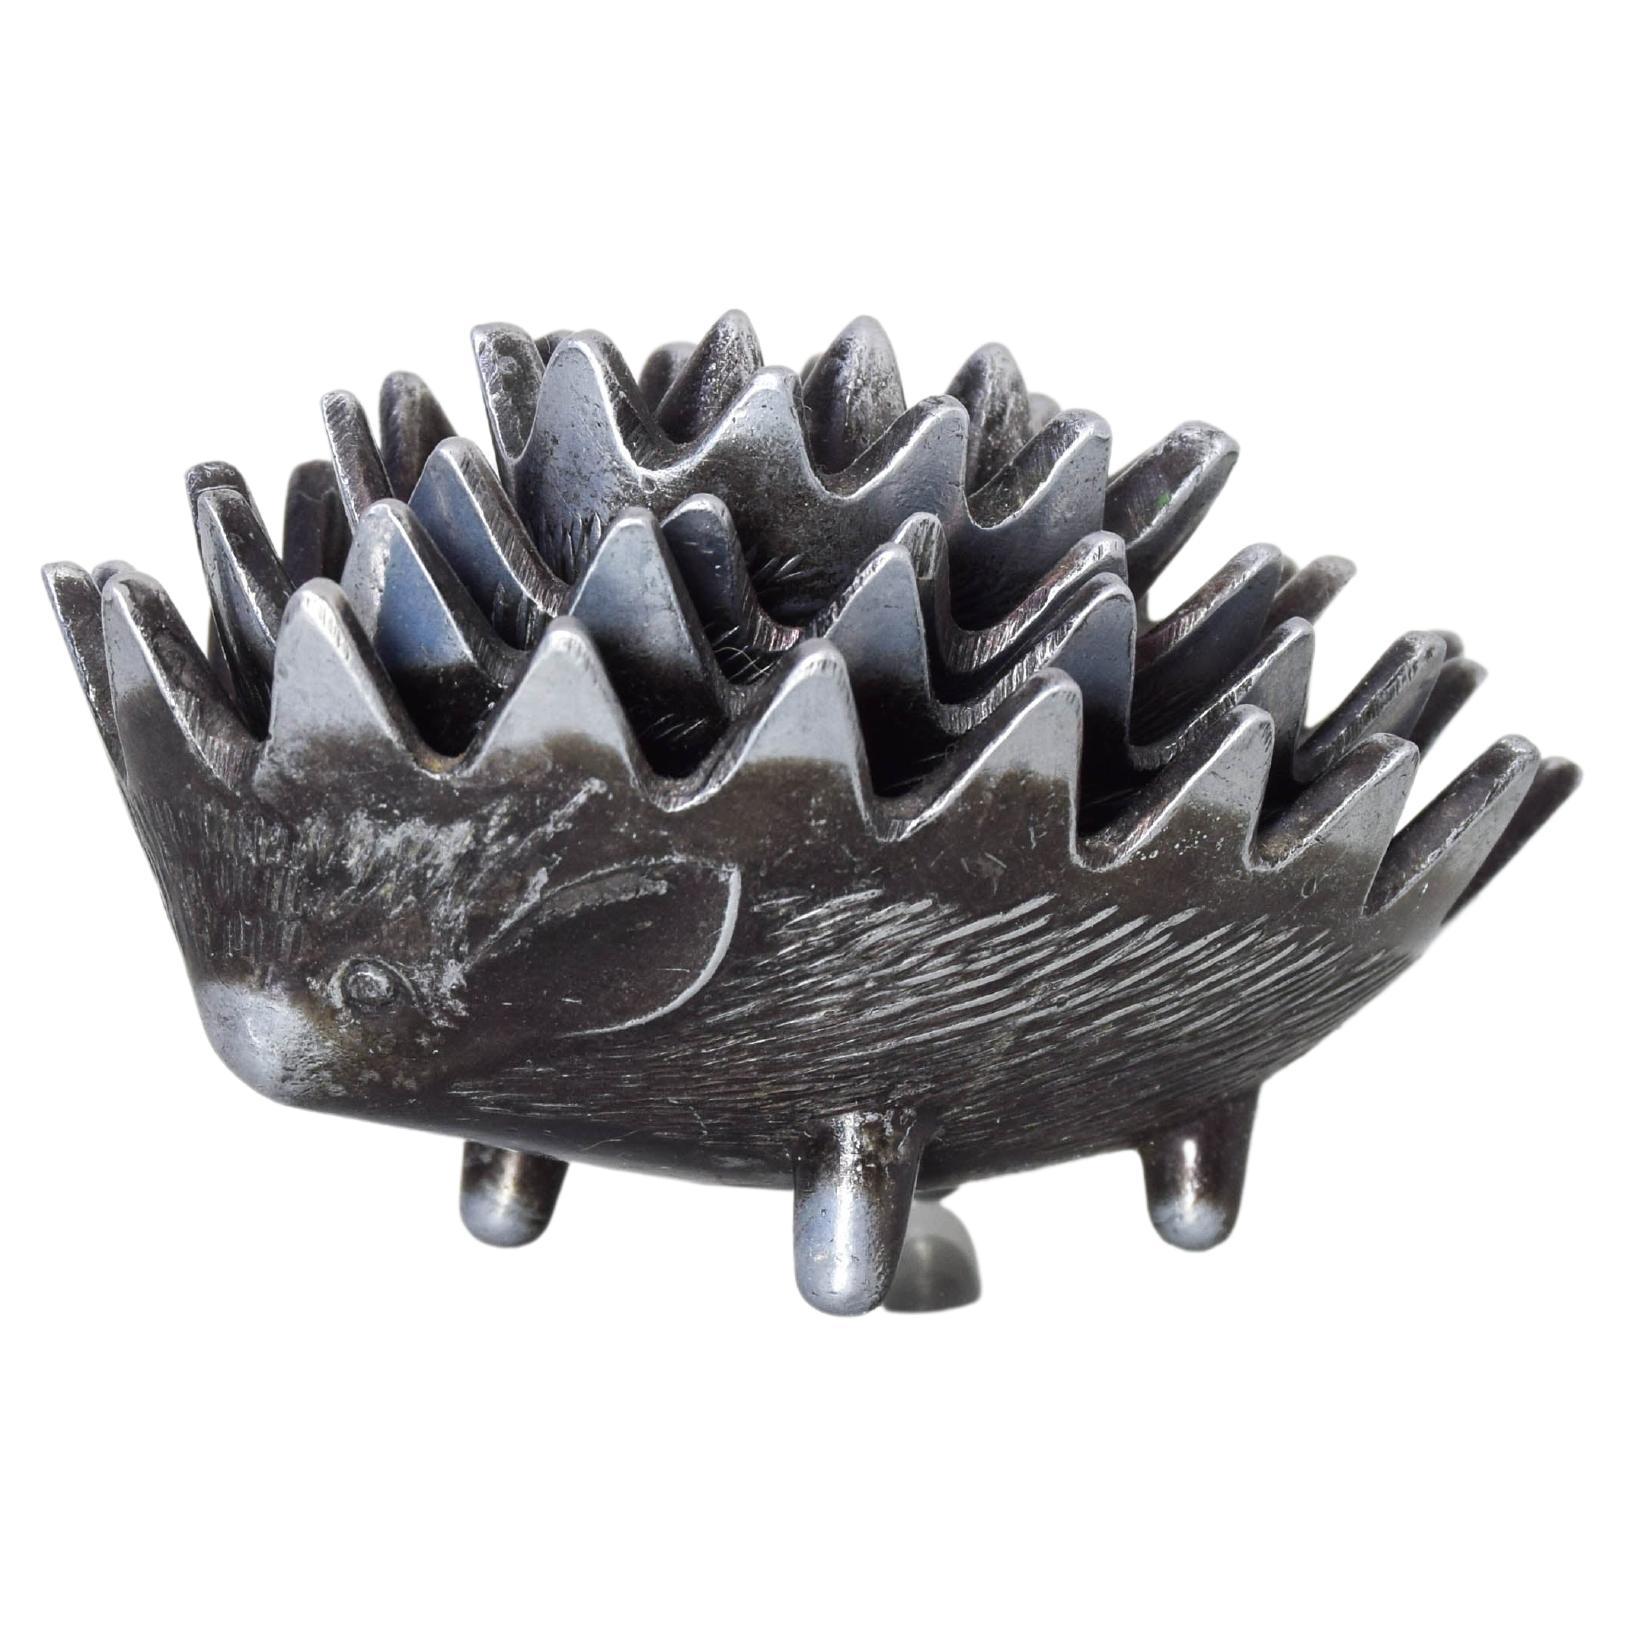 Stackable Peltre Hedgehog Ashtrays Attributed to Walter Bosse 50s